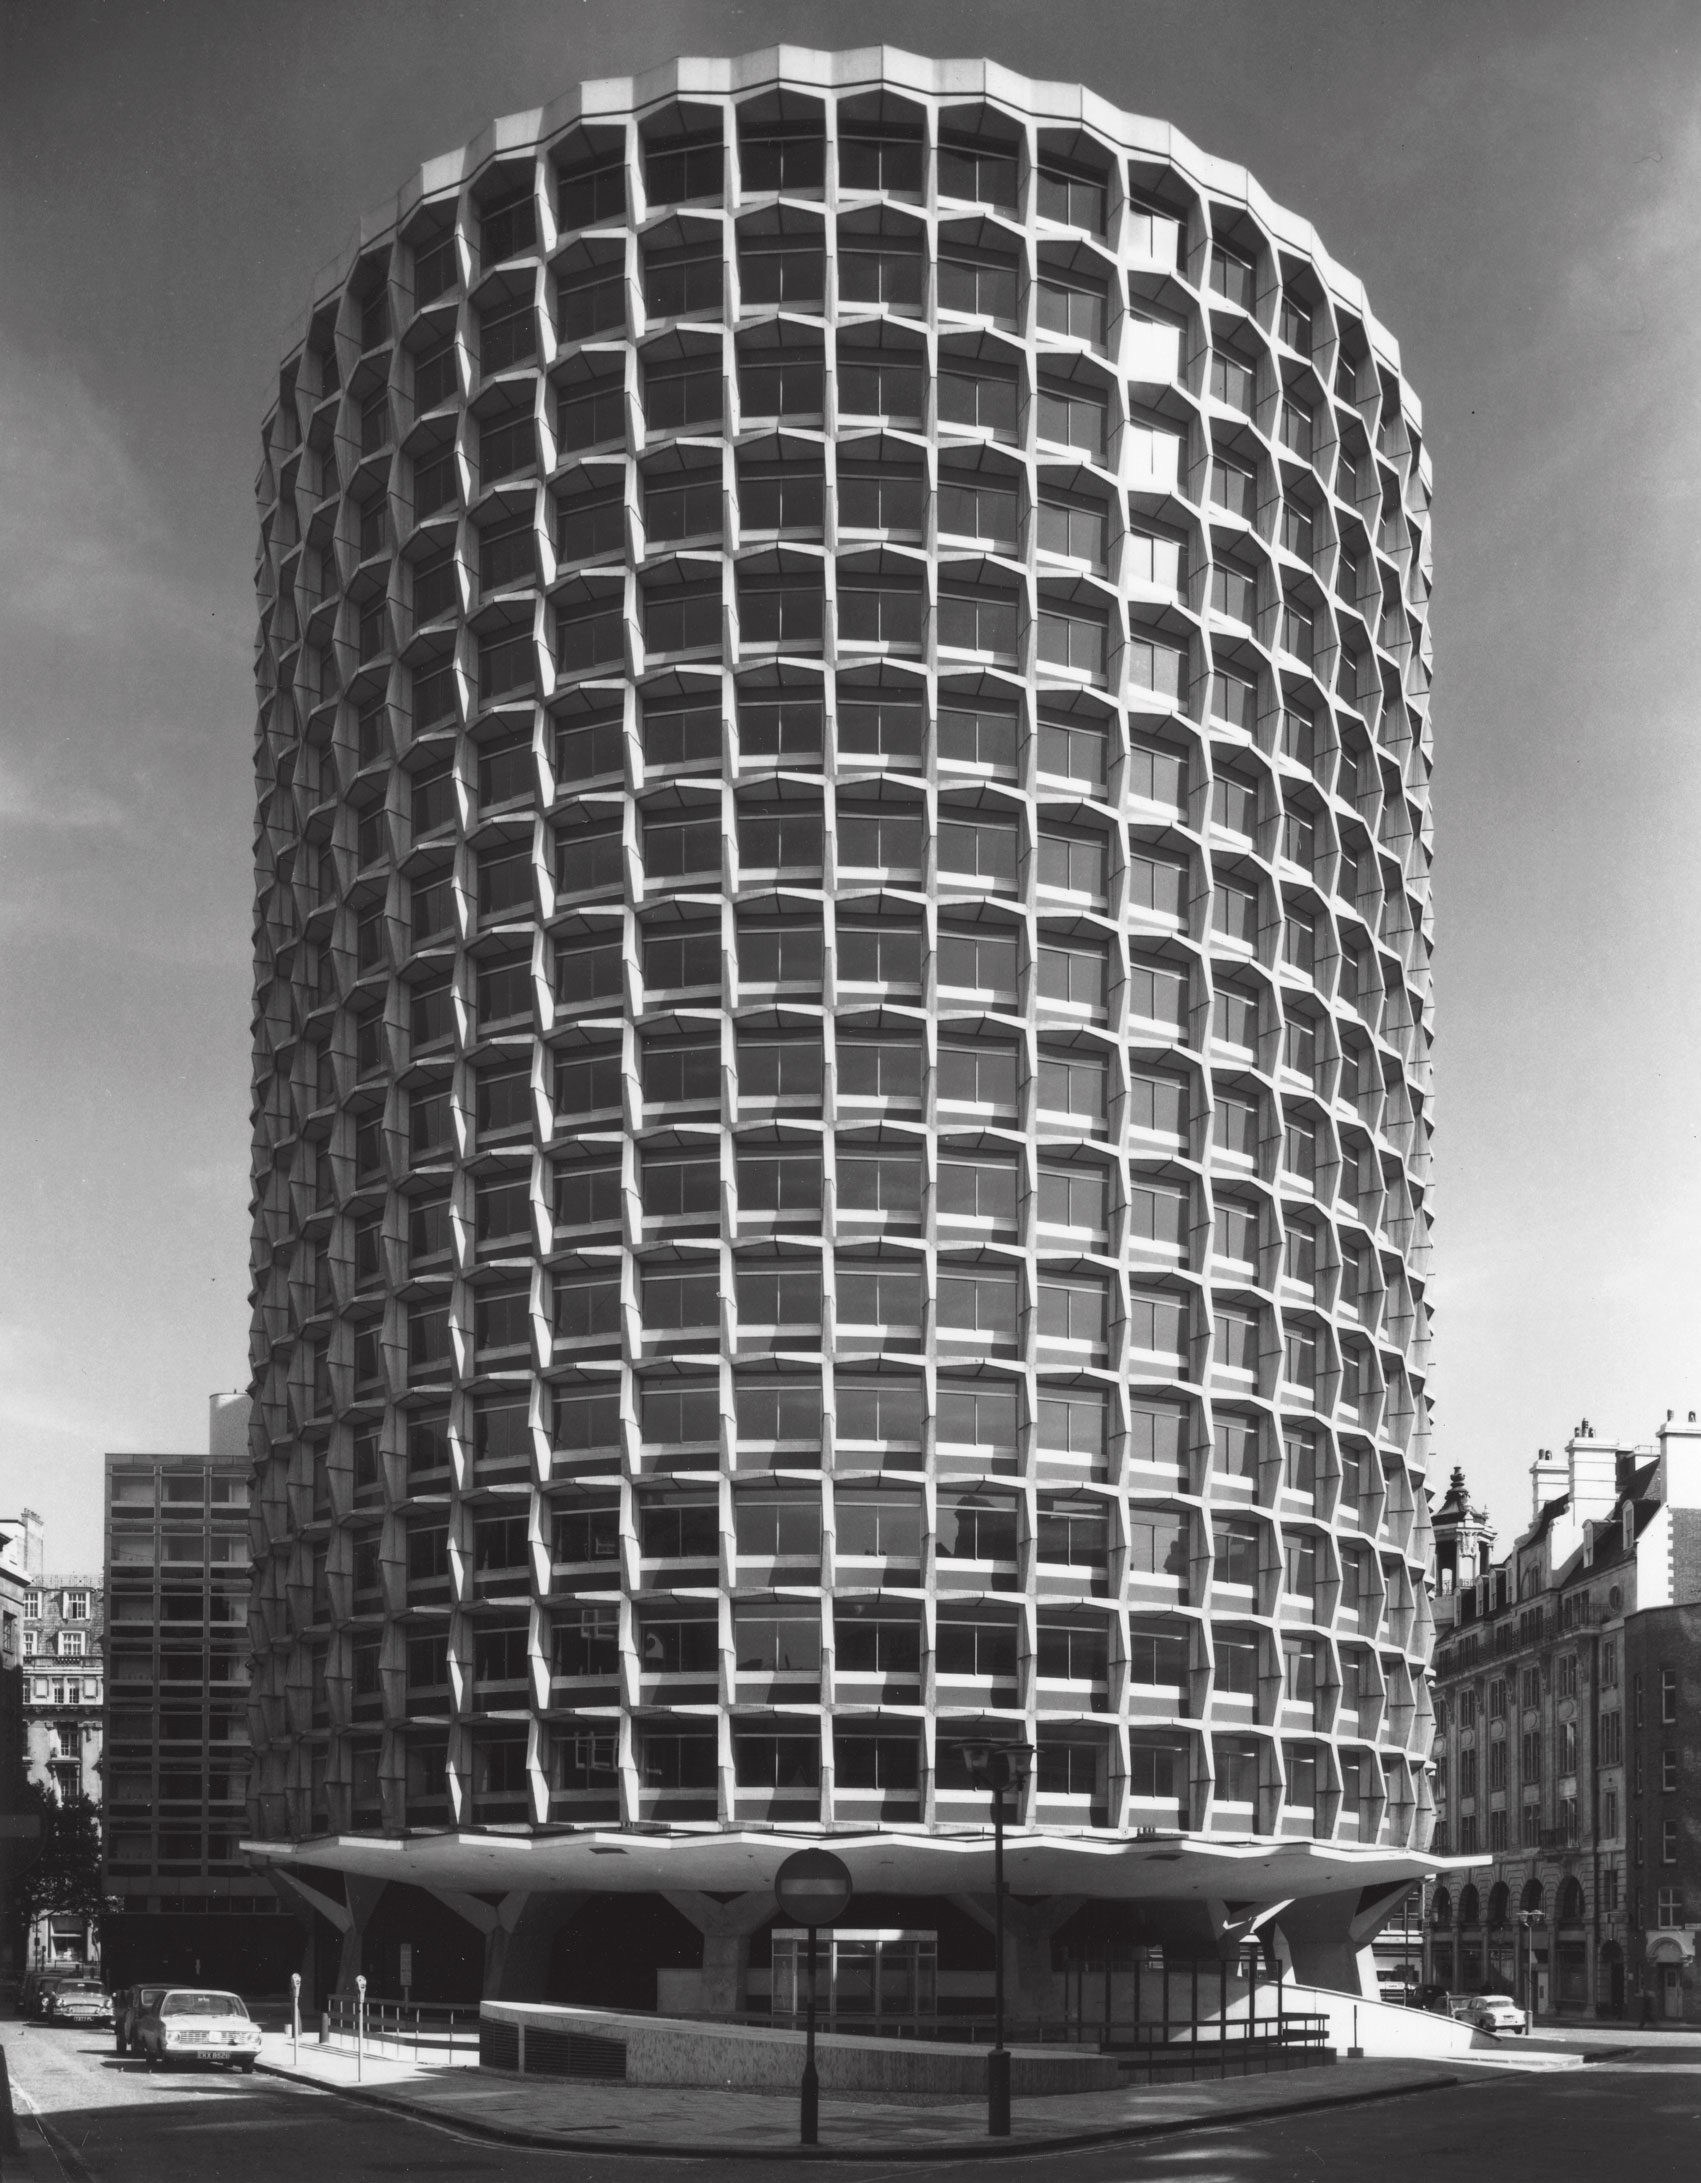 The Space House as featured in Atlas of Brutalist Architecture